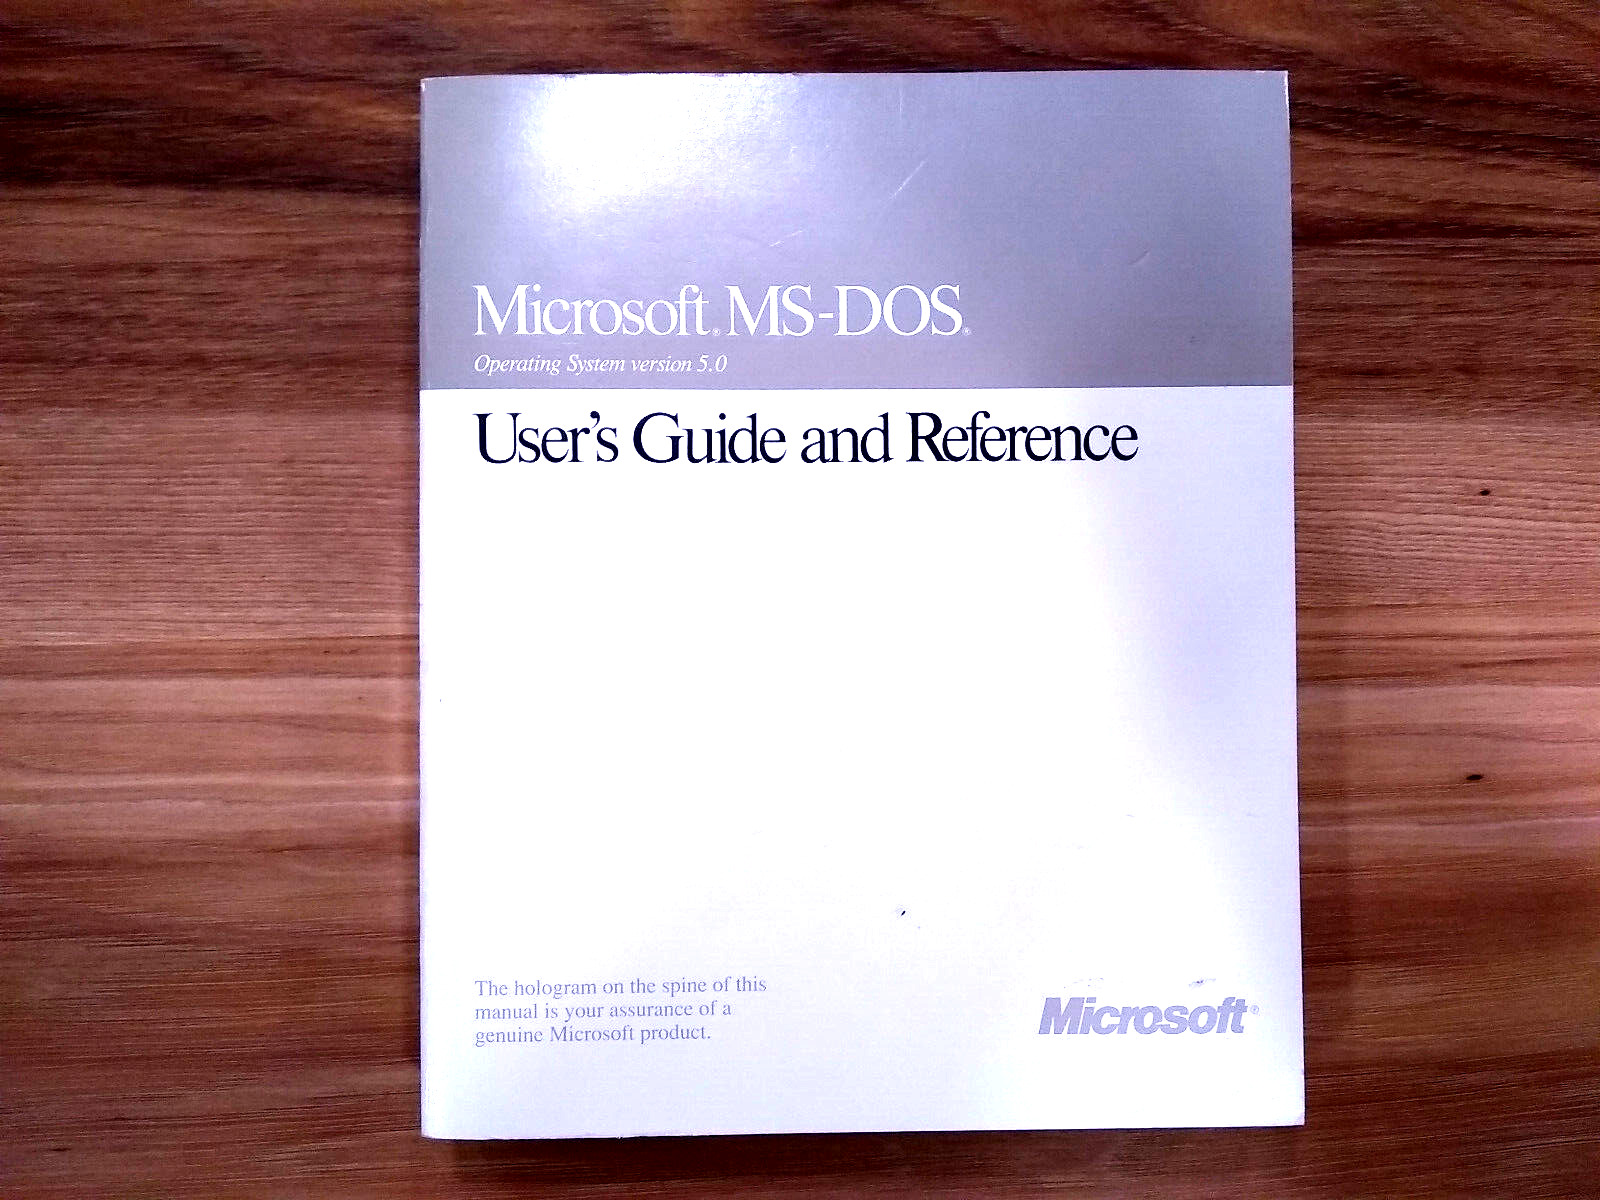 Genuine Microsoft MS-DOS Operating System version 5.0 User's Guide and Reference